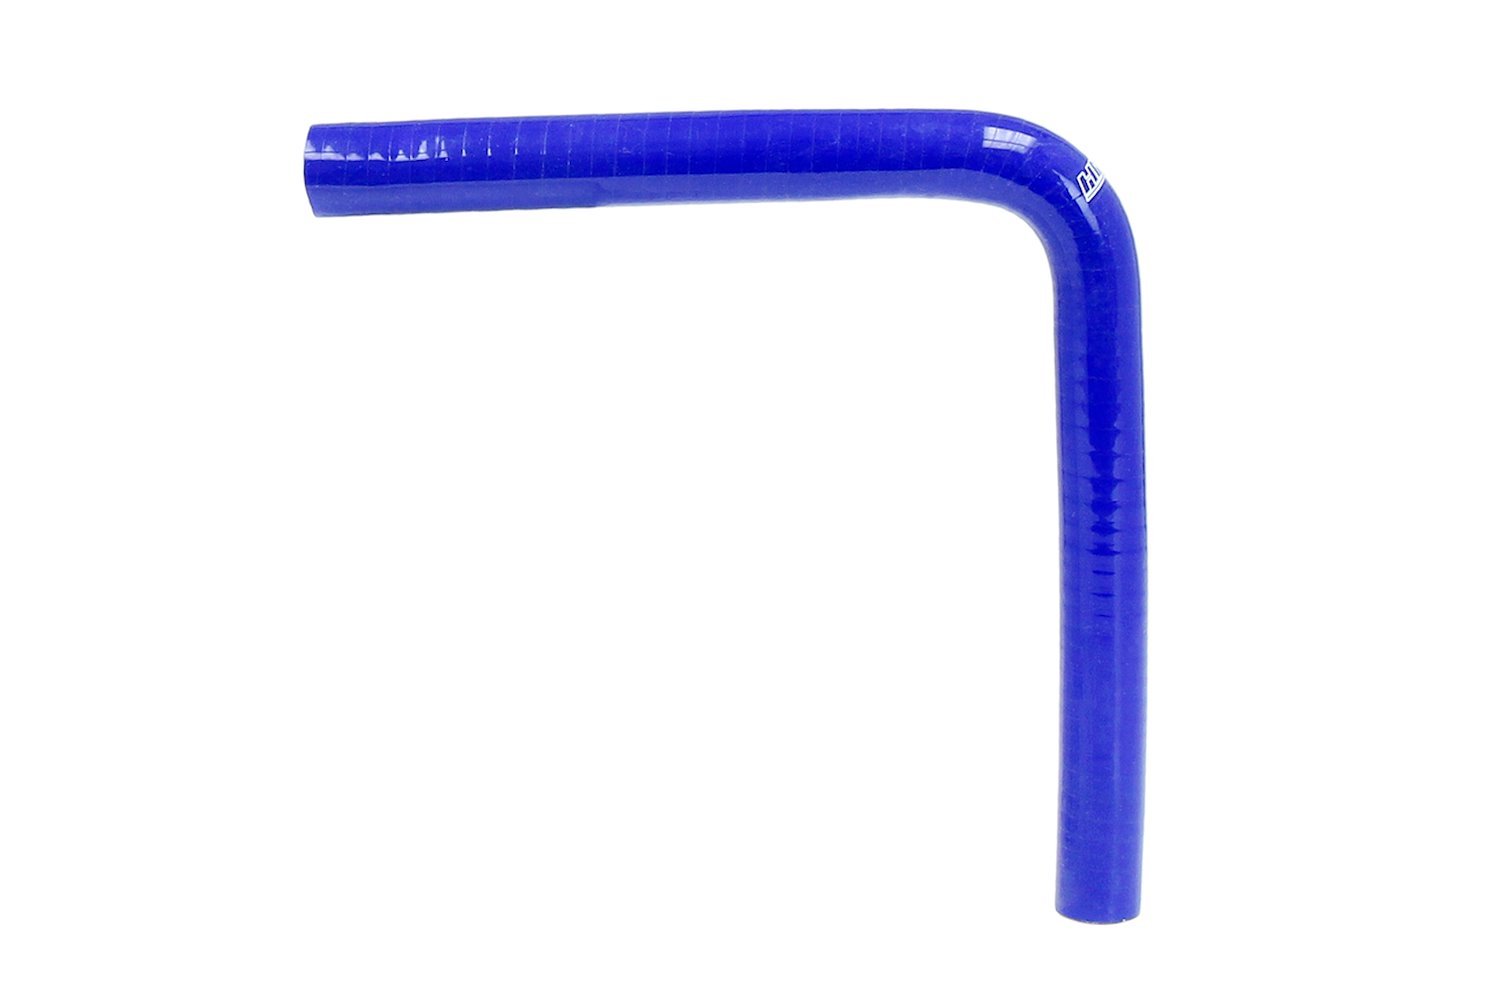 HTSEC90-075-BLUE Silicone 90-Degree Elbow Coupler Hose, High-Temp 4-Ply Reinforced, 3/4 in. ID, Blue